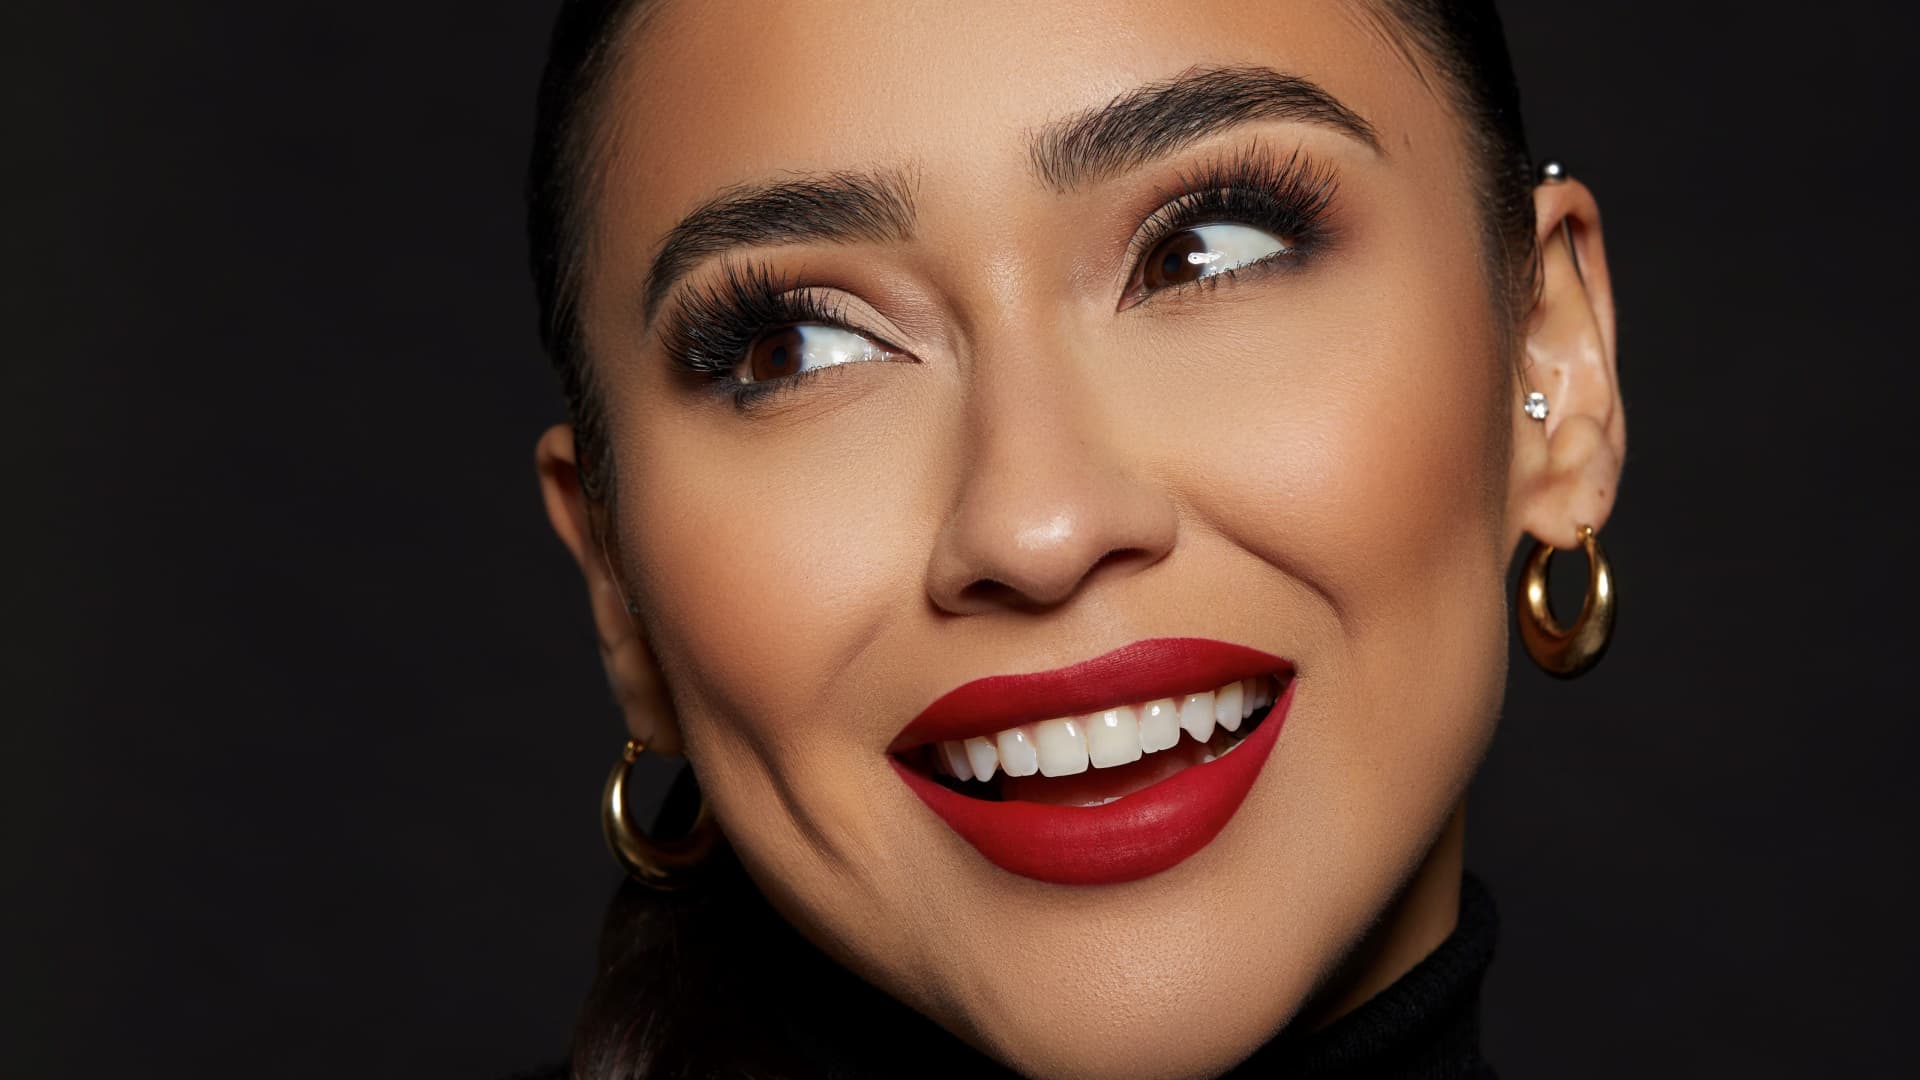 Araceli Beauty founder turned side gig into brand that brings in millions